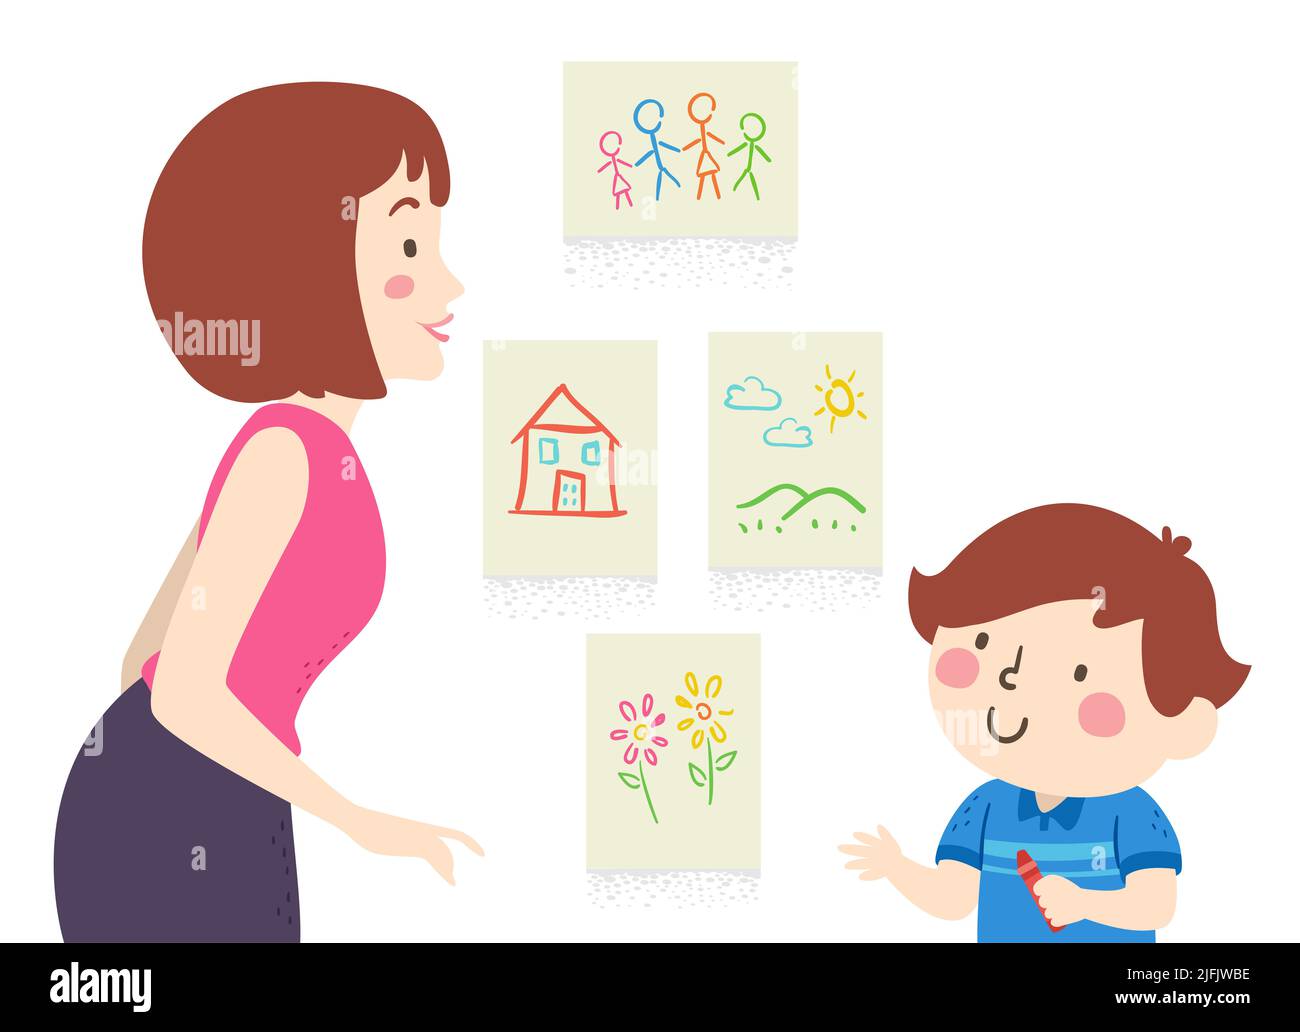 Illustration of Kid Boy Holding a Crayon with Mom Looking at His Drawings in His Art Exhibit at Home Stock Photo